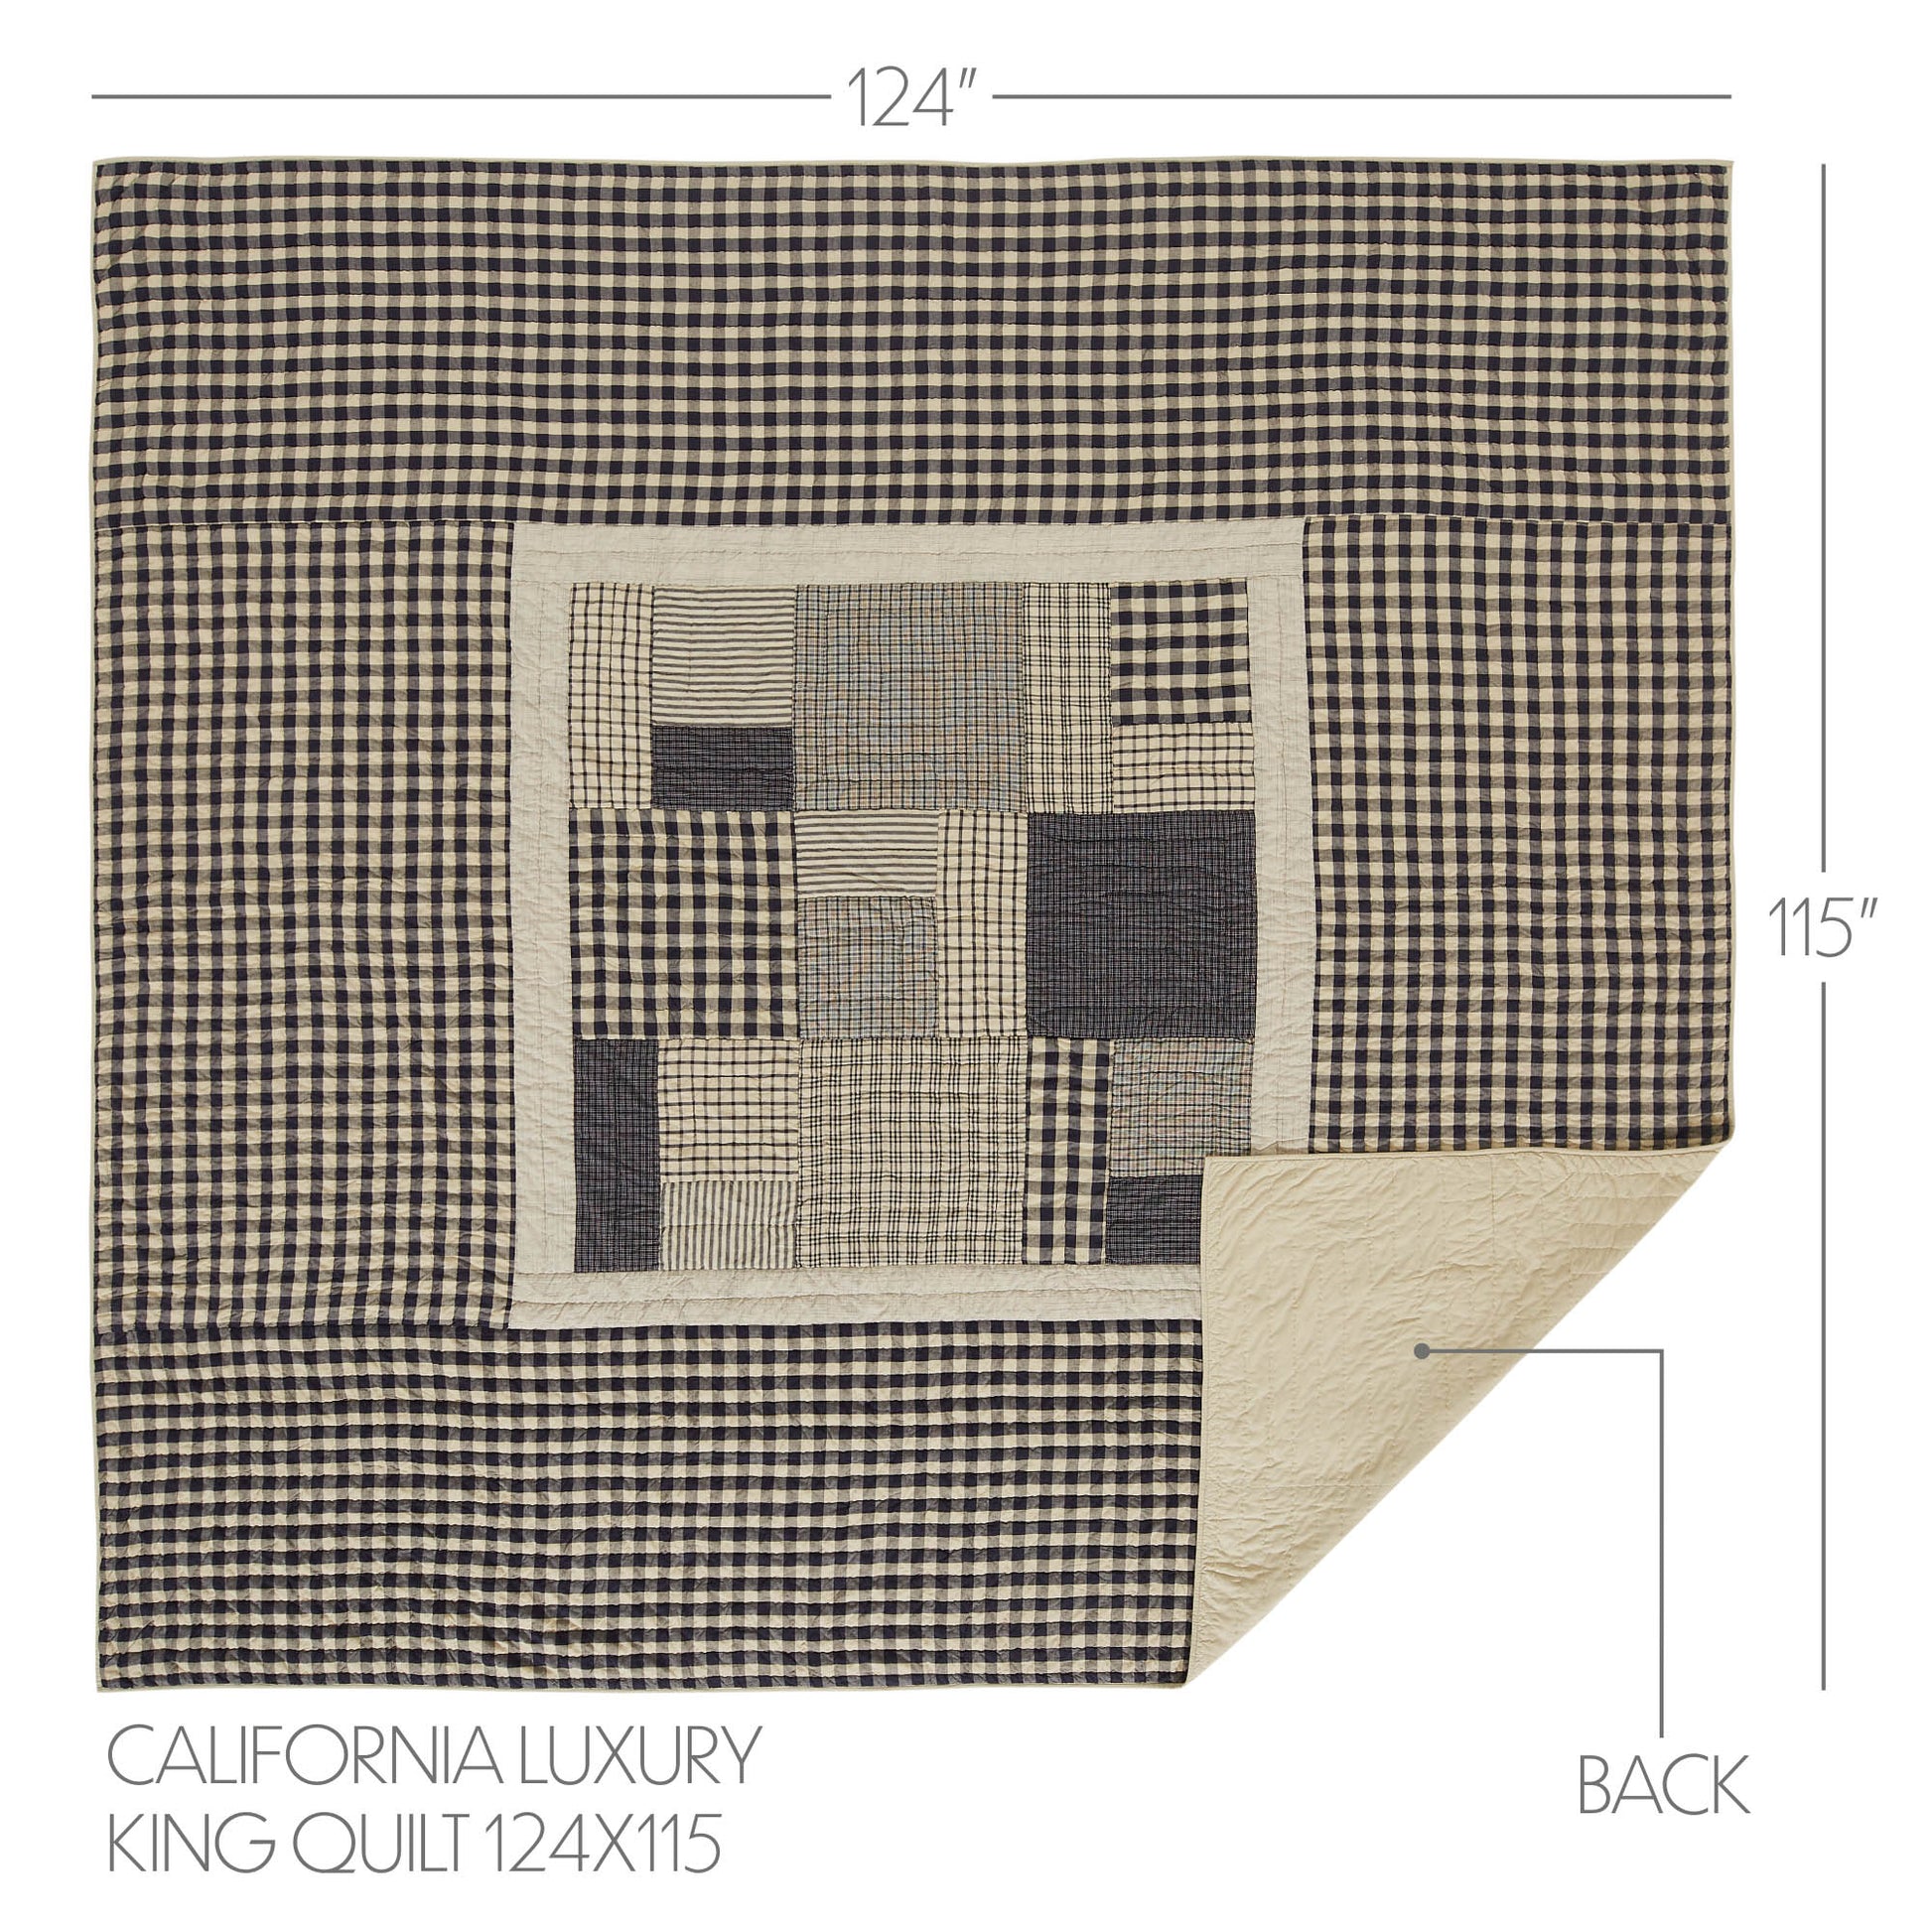 My Country California/Luxury King Quilt 124Wx115L SpadezStore